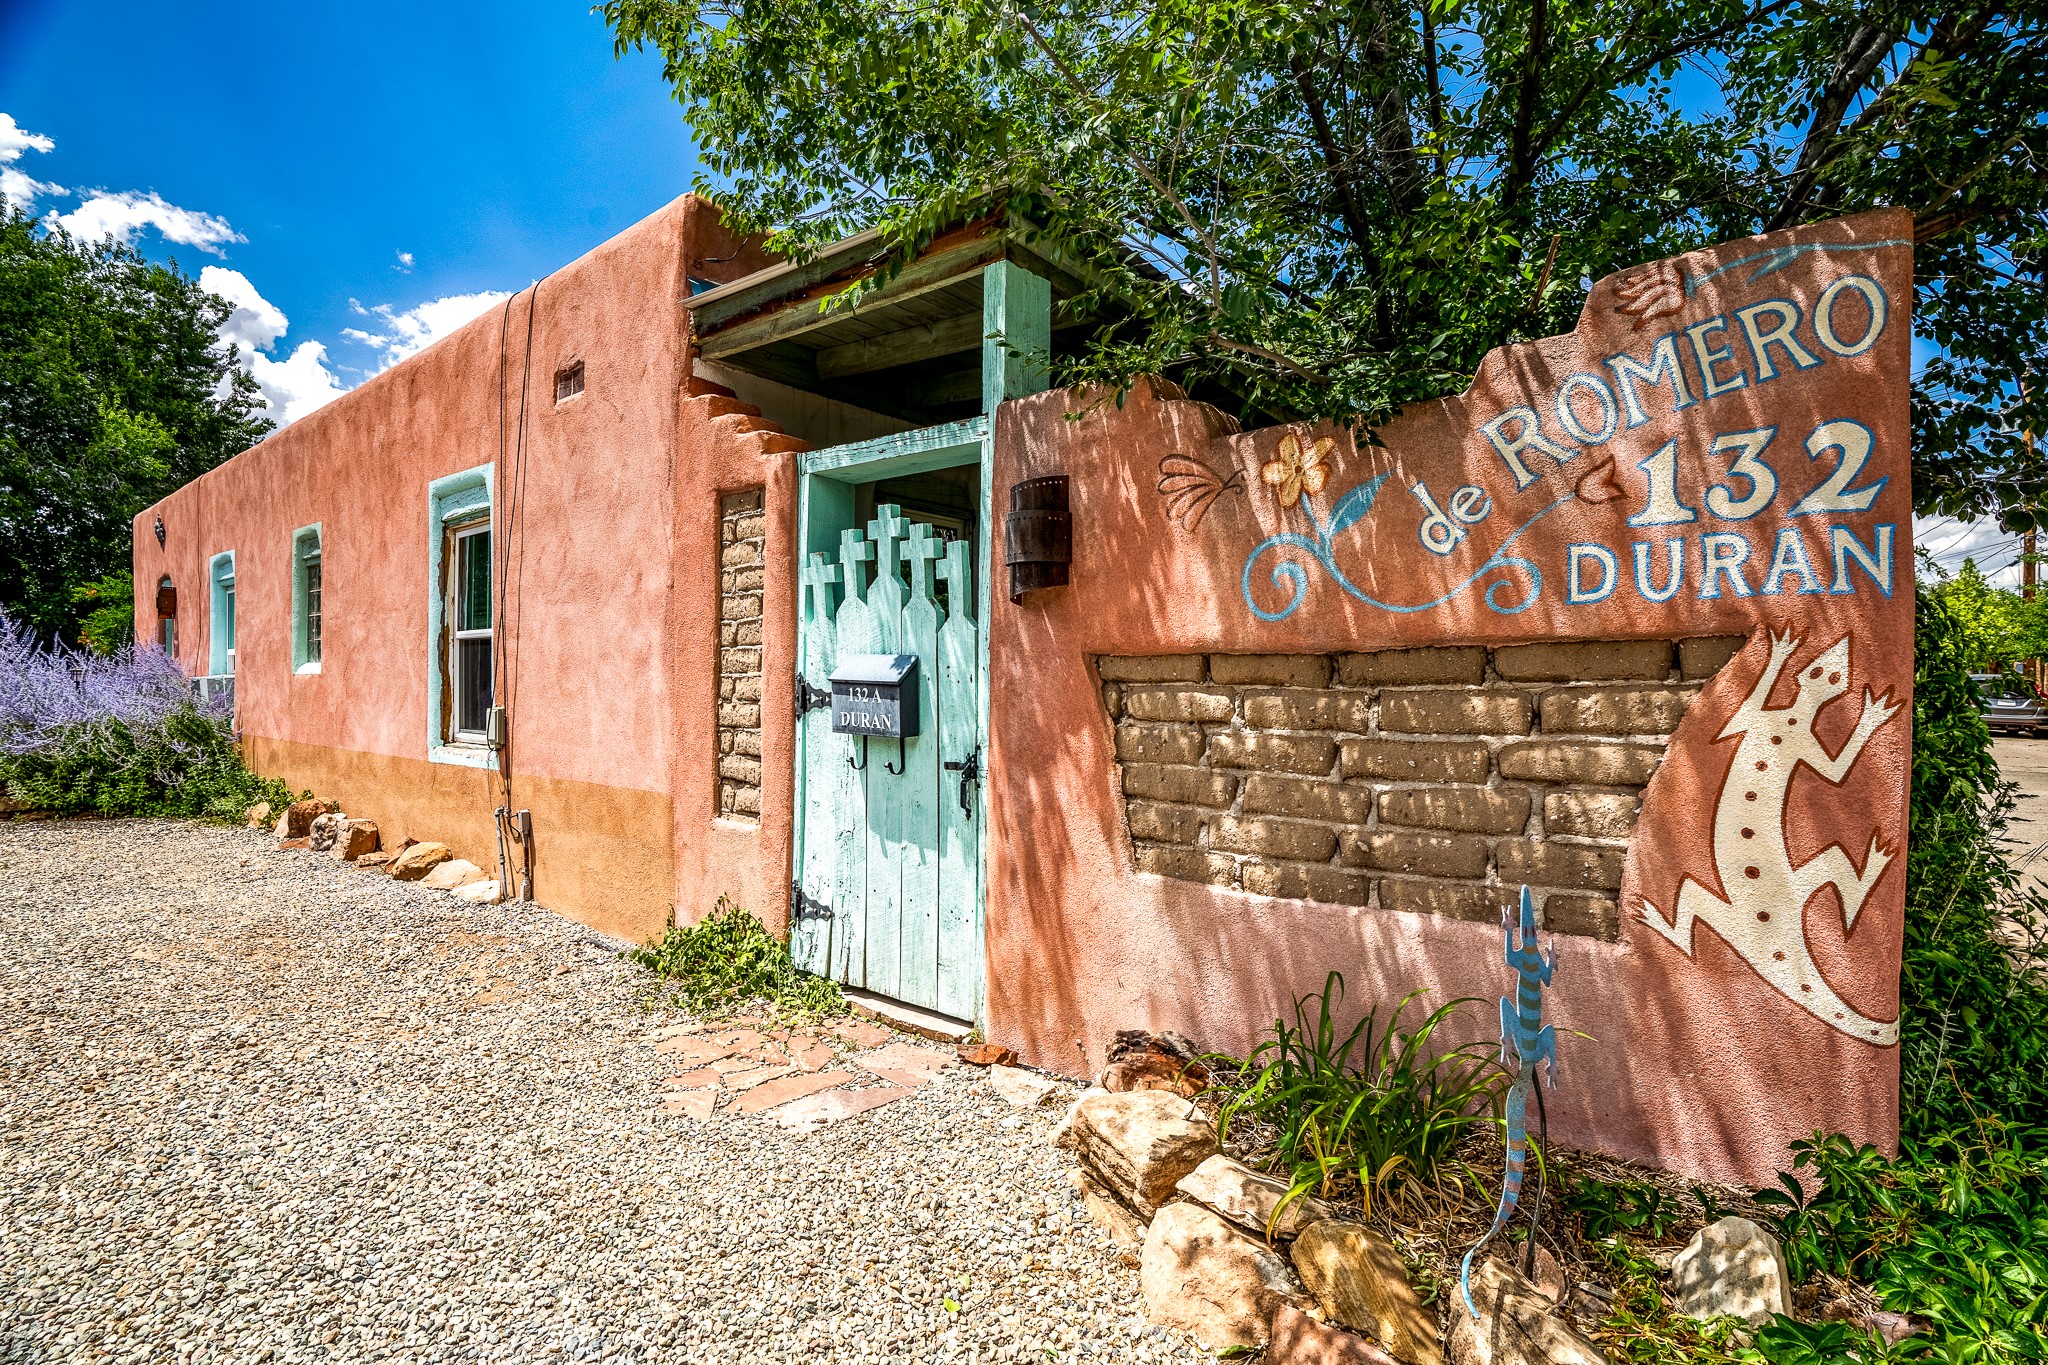 132 Duran Street A, Santa Fe, New Mexico 87501, 1 Bedroom Bedrooms, ,1 BathroomBathrooms,Residential,For Sale,132 Duran Street A,202338926